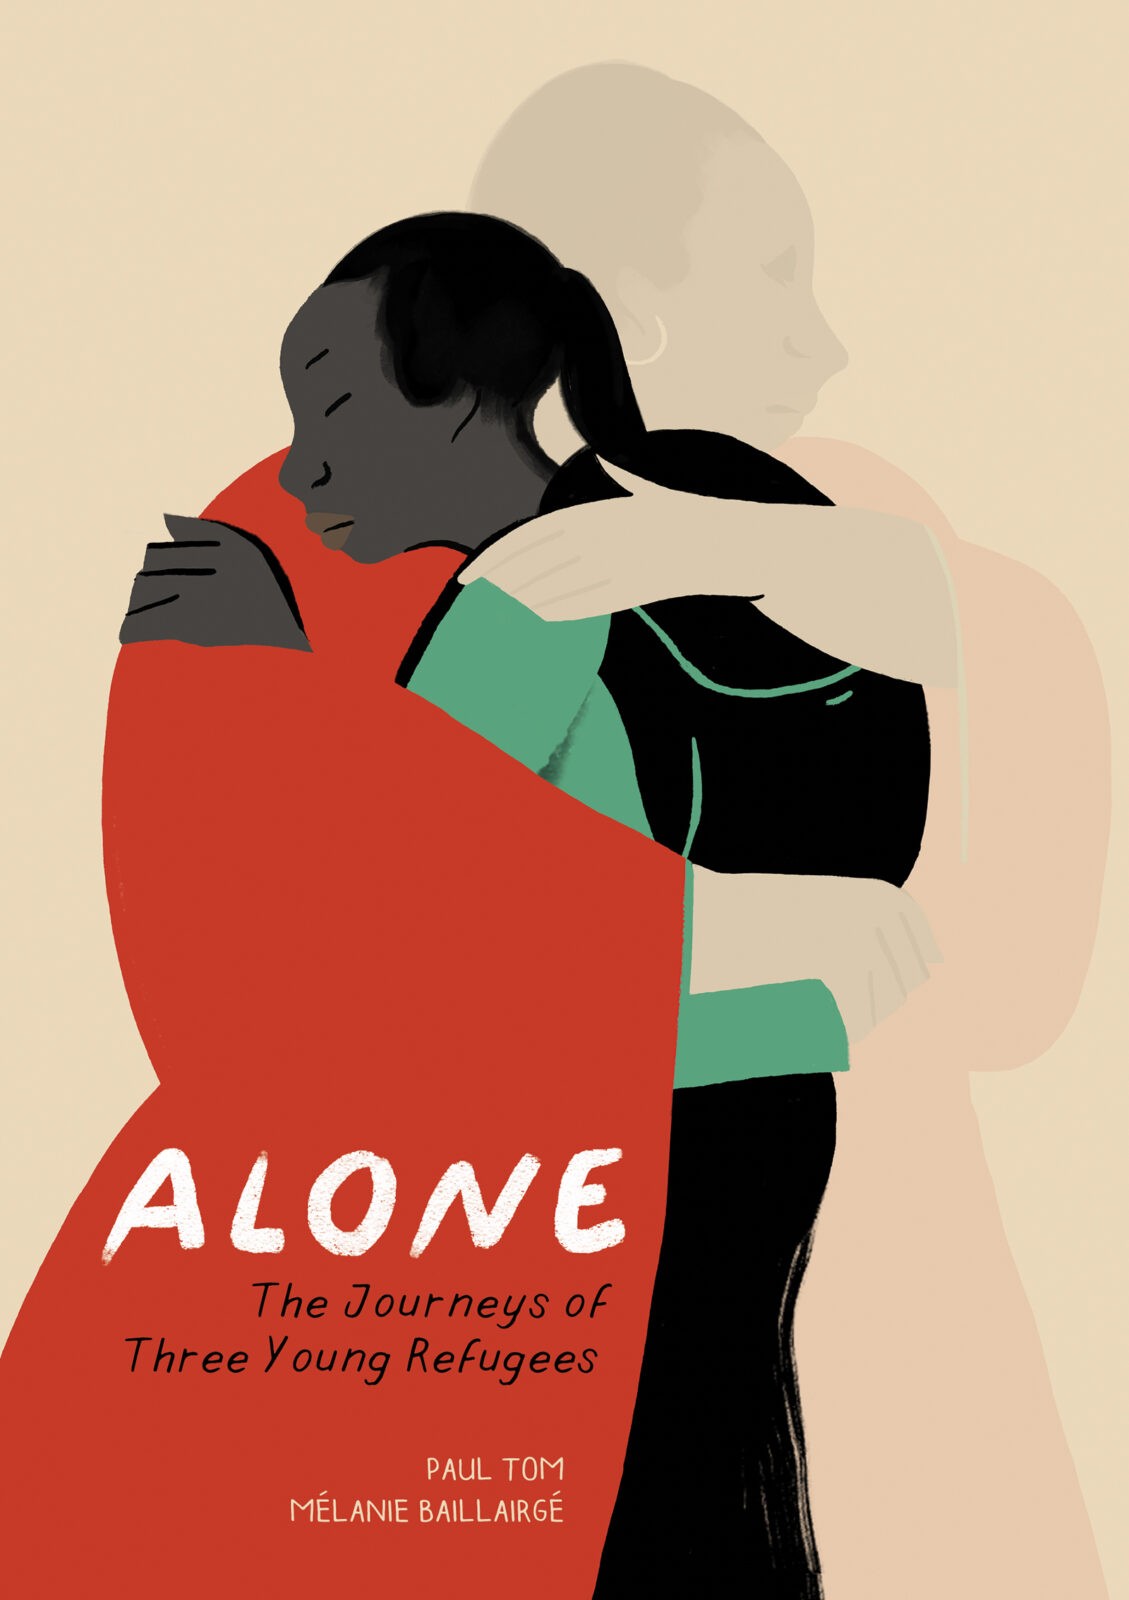 Alone: The Journeys of Three Young Refugees